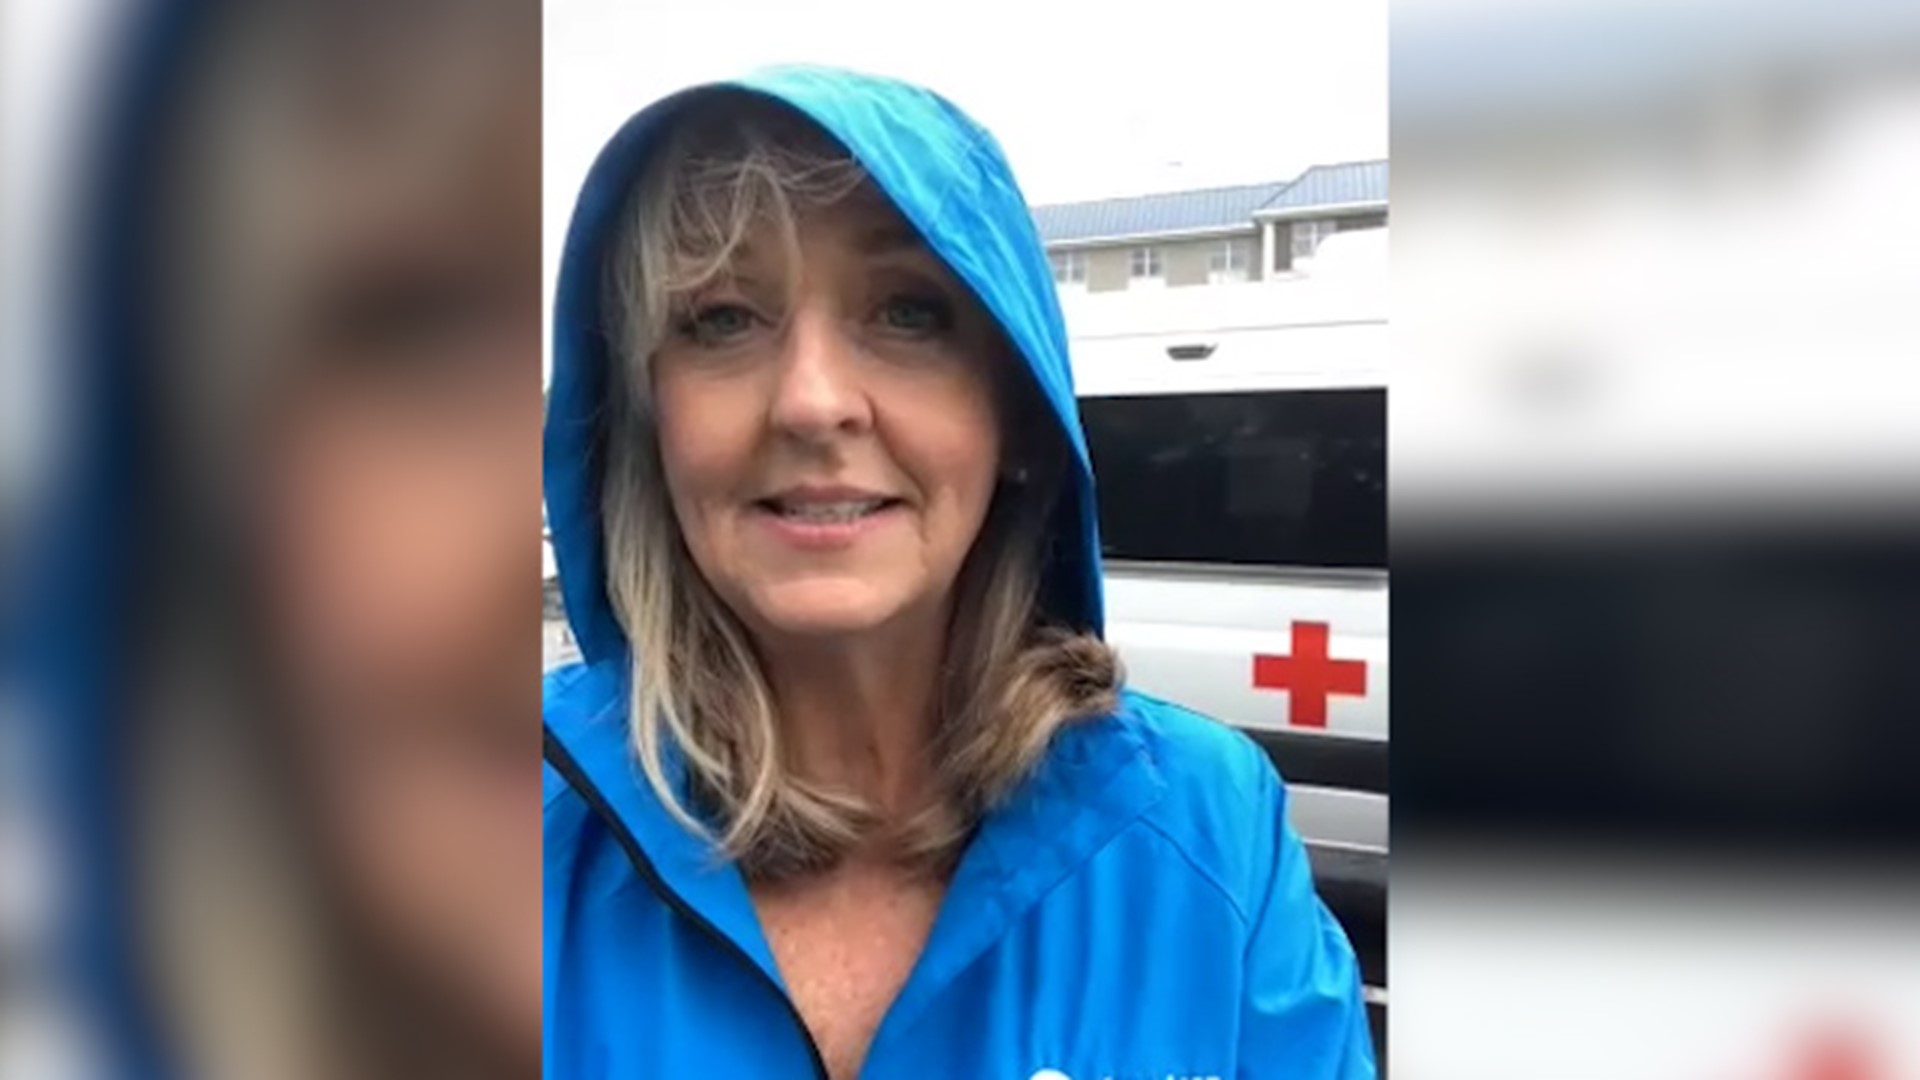 Hundreds of trained Red Cross workers offer relief and support efforts in Florida.